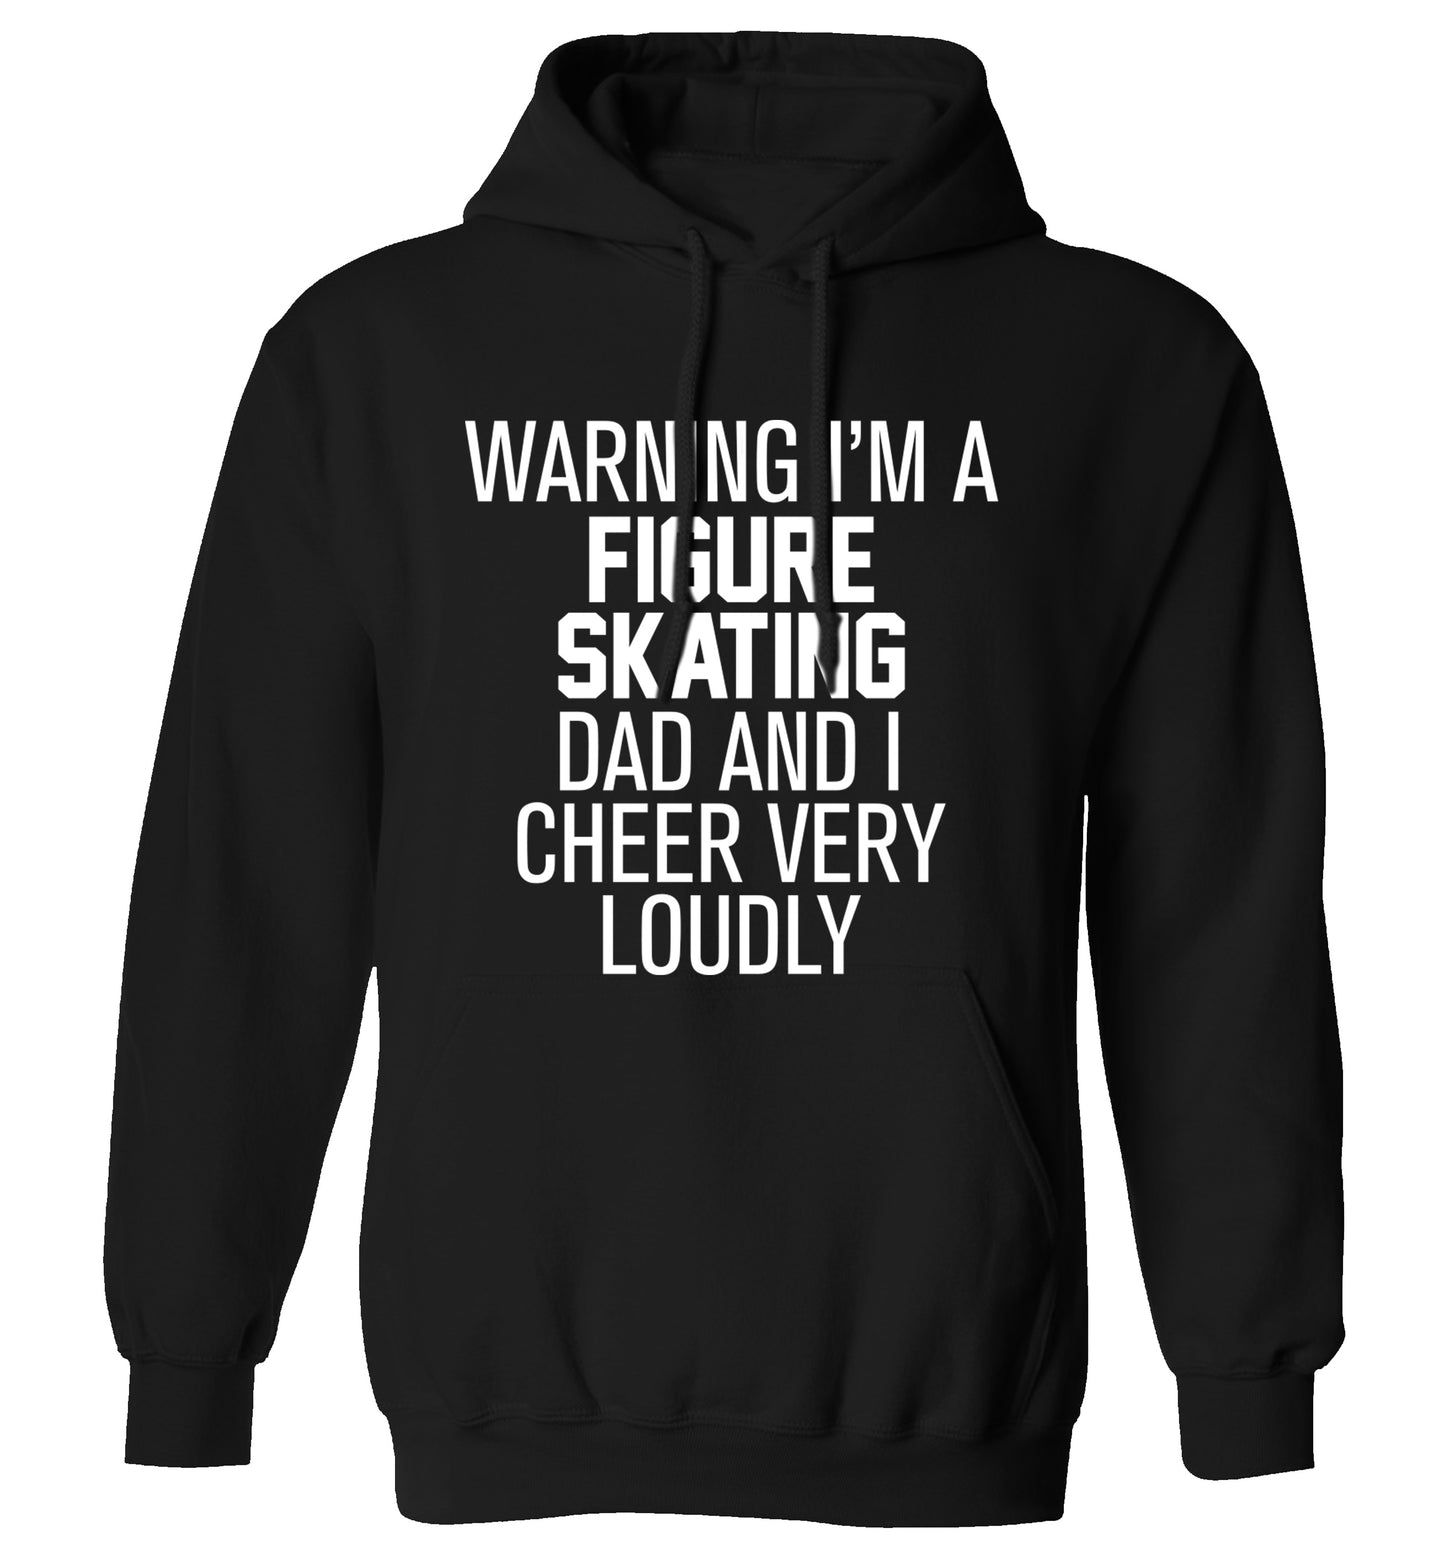 Warning I'm a figure skating dad and I cheer very loudly adults unisexblack hoodie 2XL